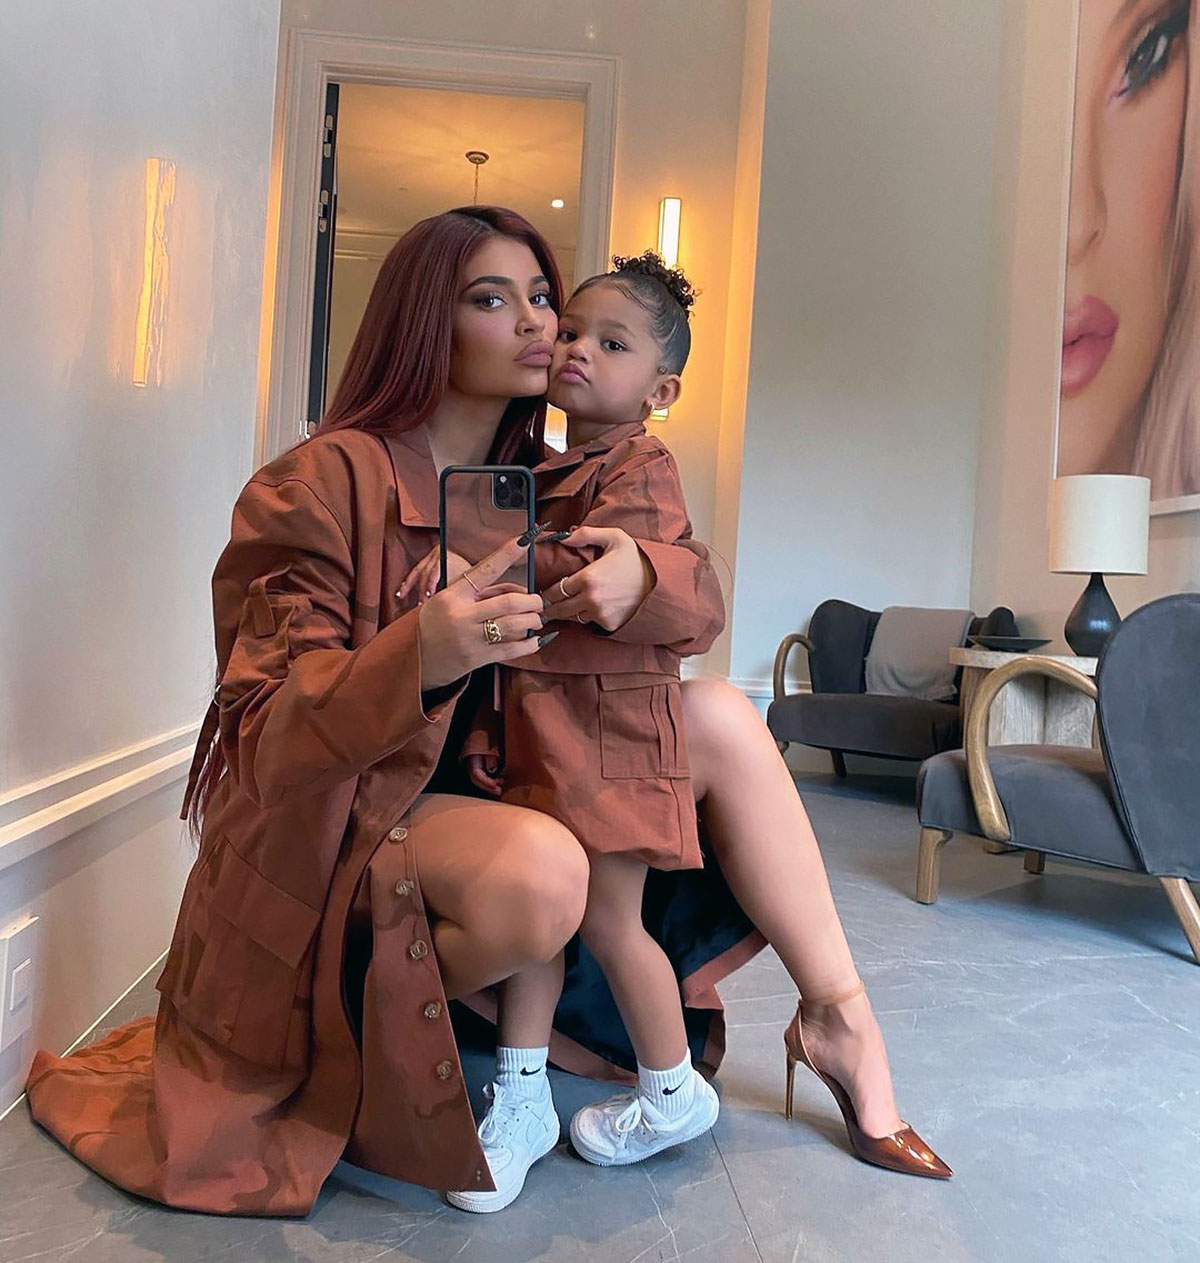 Kylie Jenner's Daughter, 2, Poses with $1,180 Mini Handbag